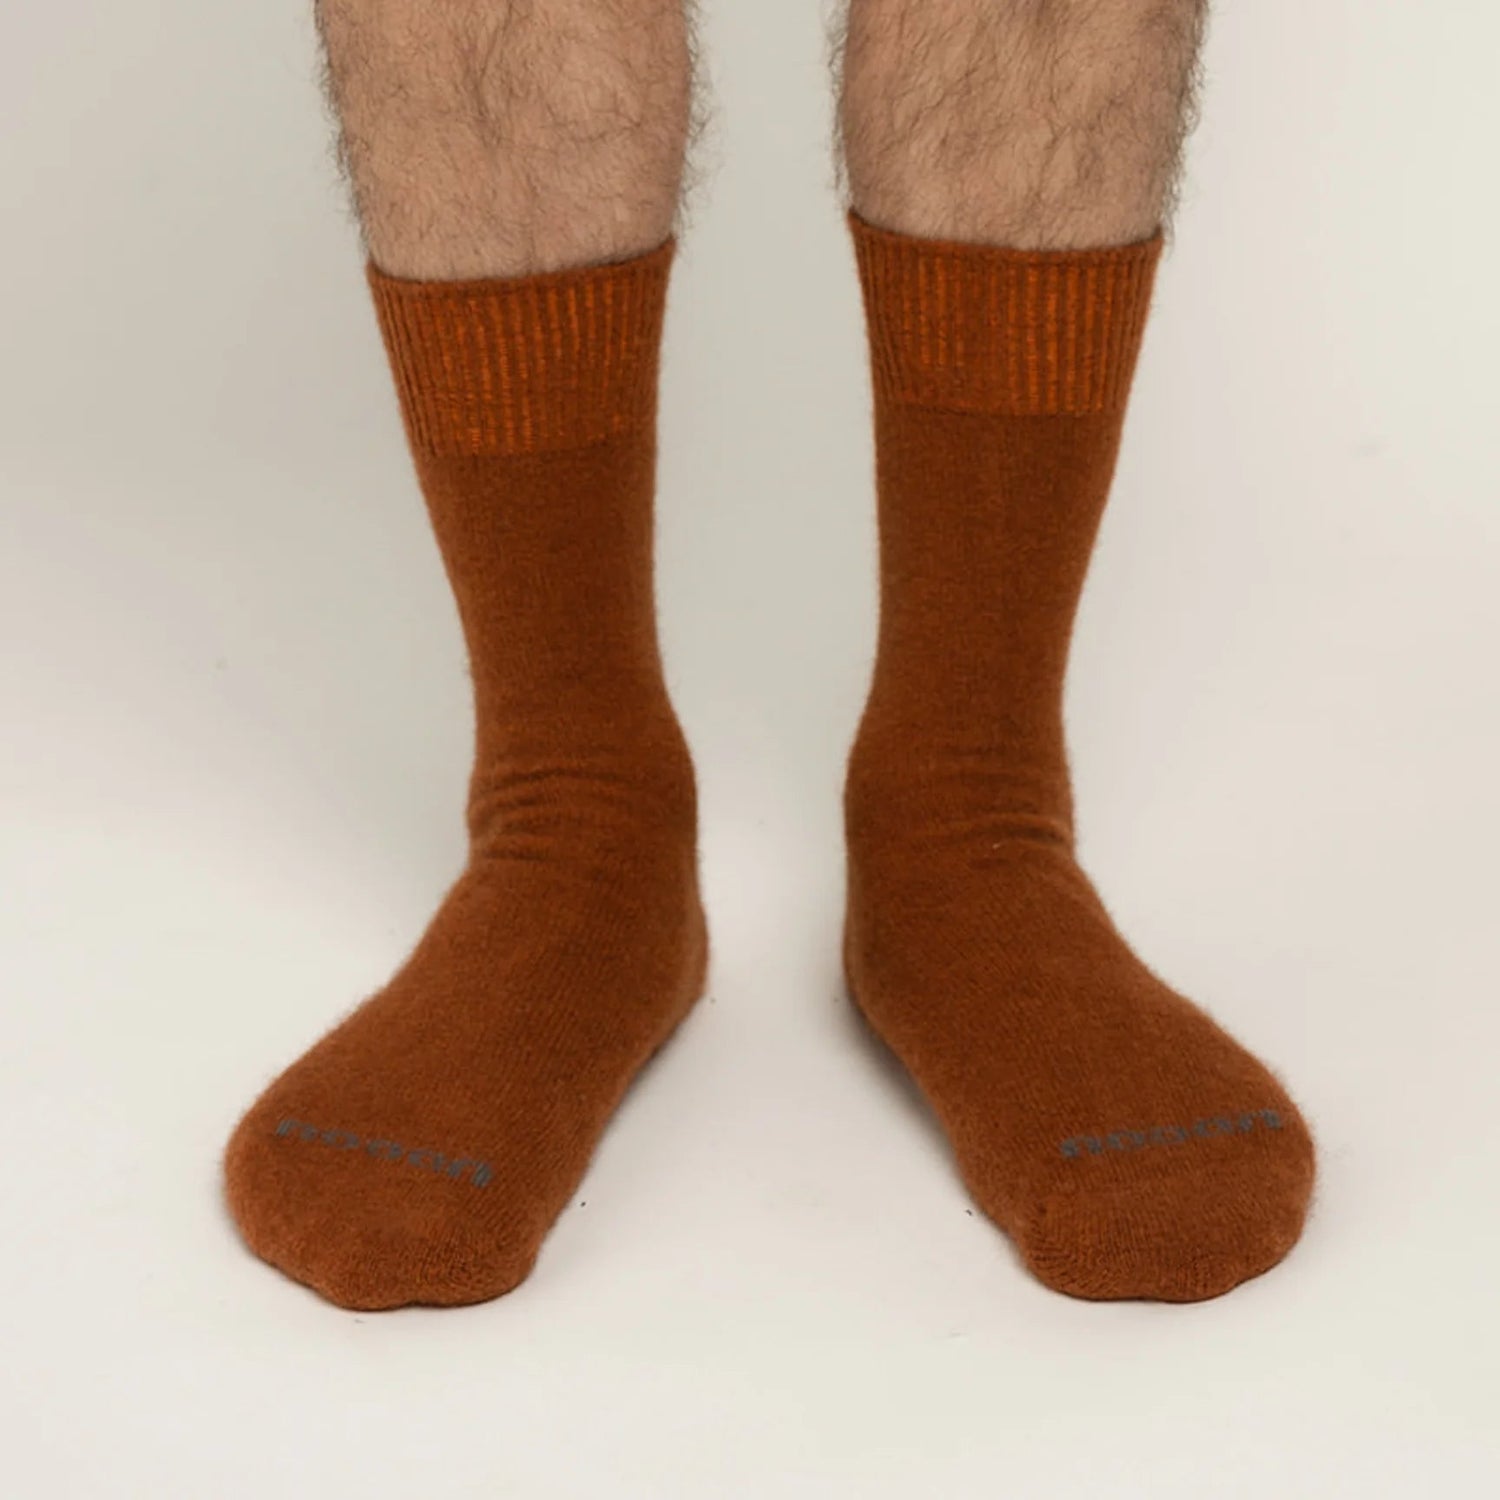 Nooan Socks - Piha, Leather Brown - The Flower Crate